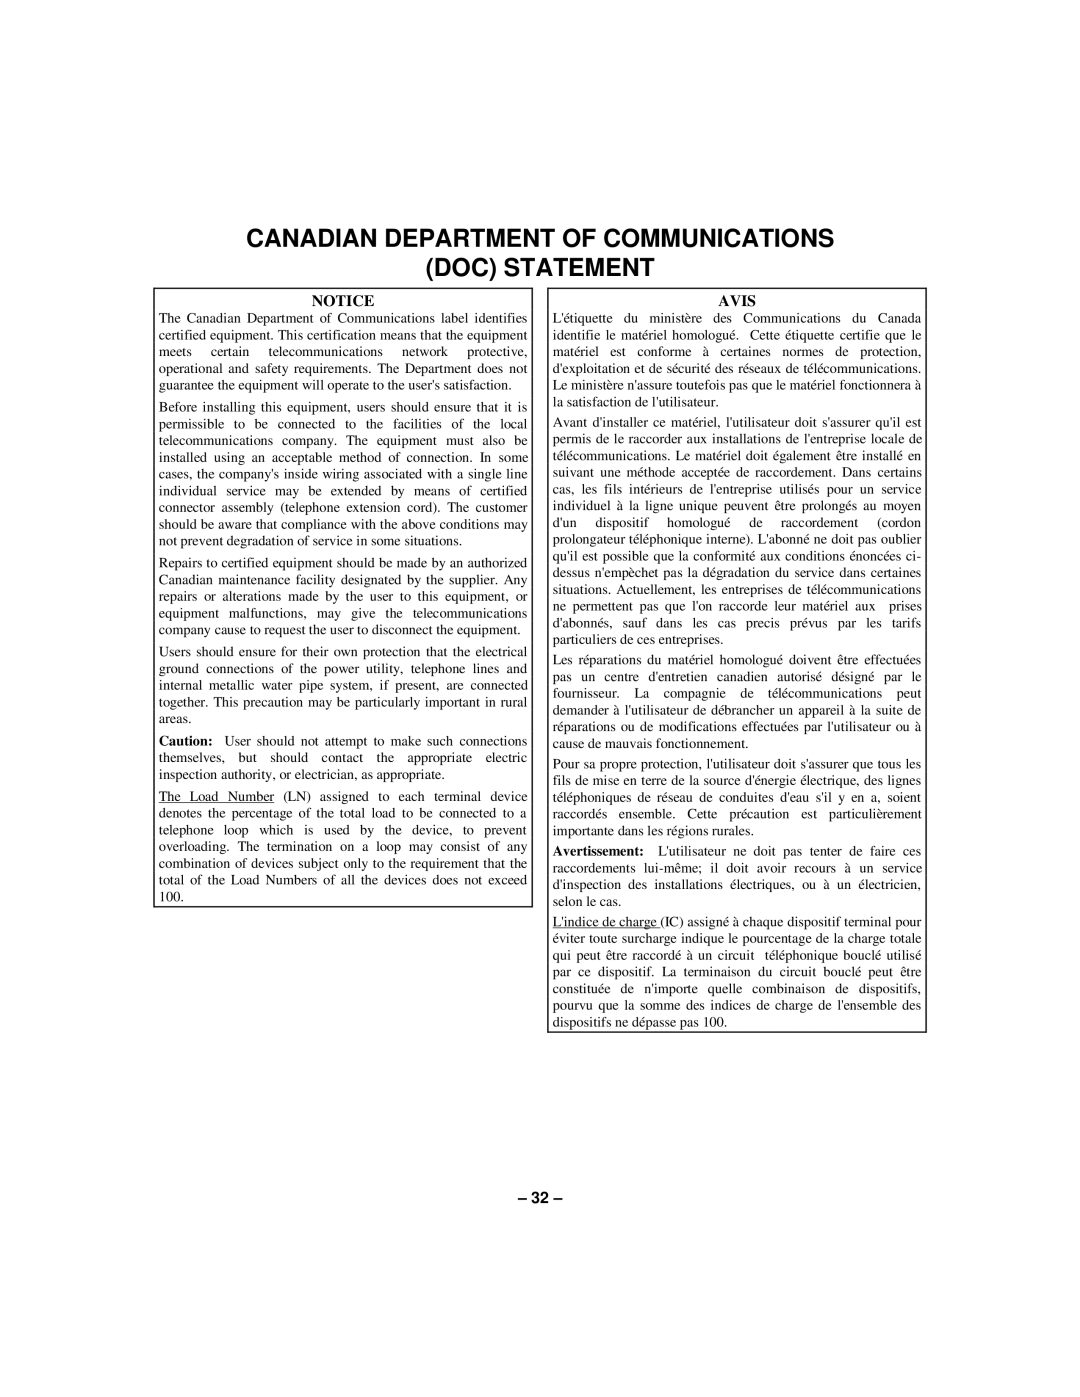 First Alert N8891-1 manual Canadian Department Of Communications, Doc Statement 